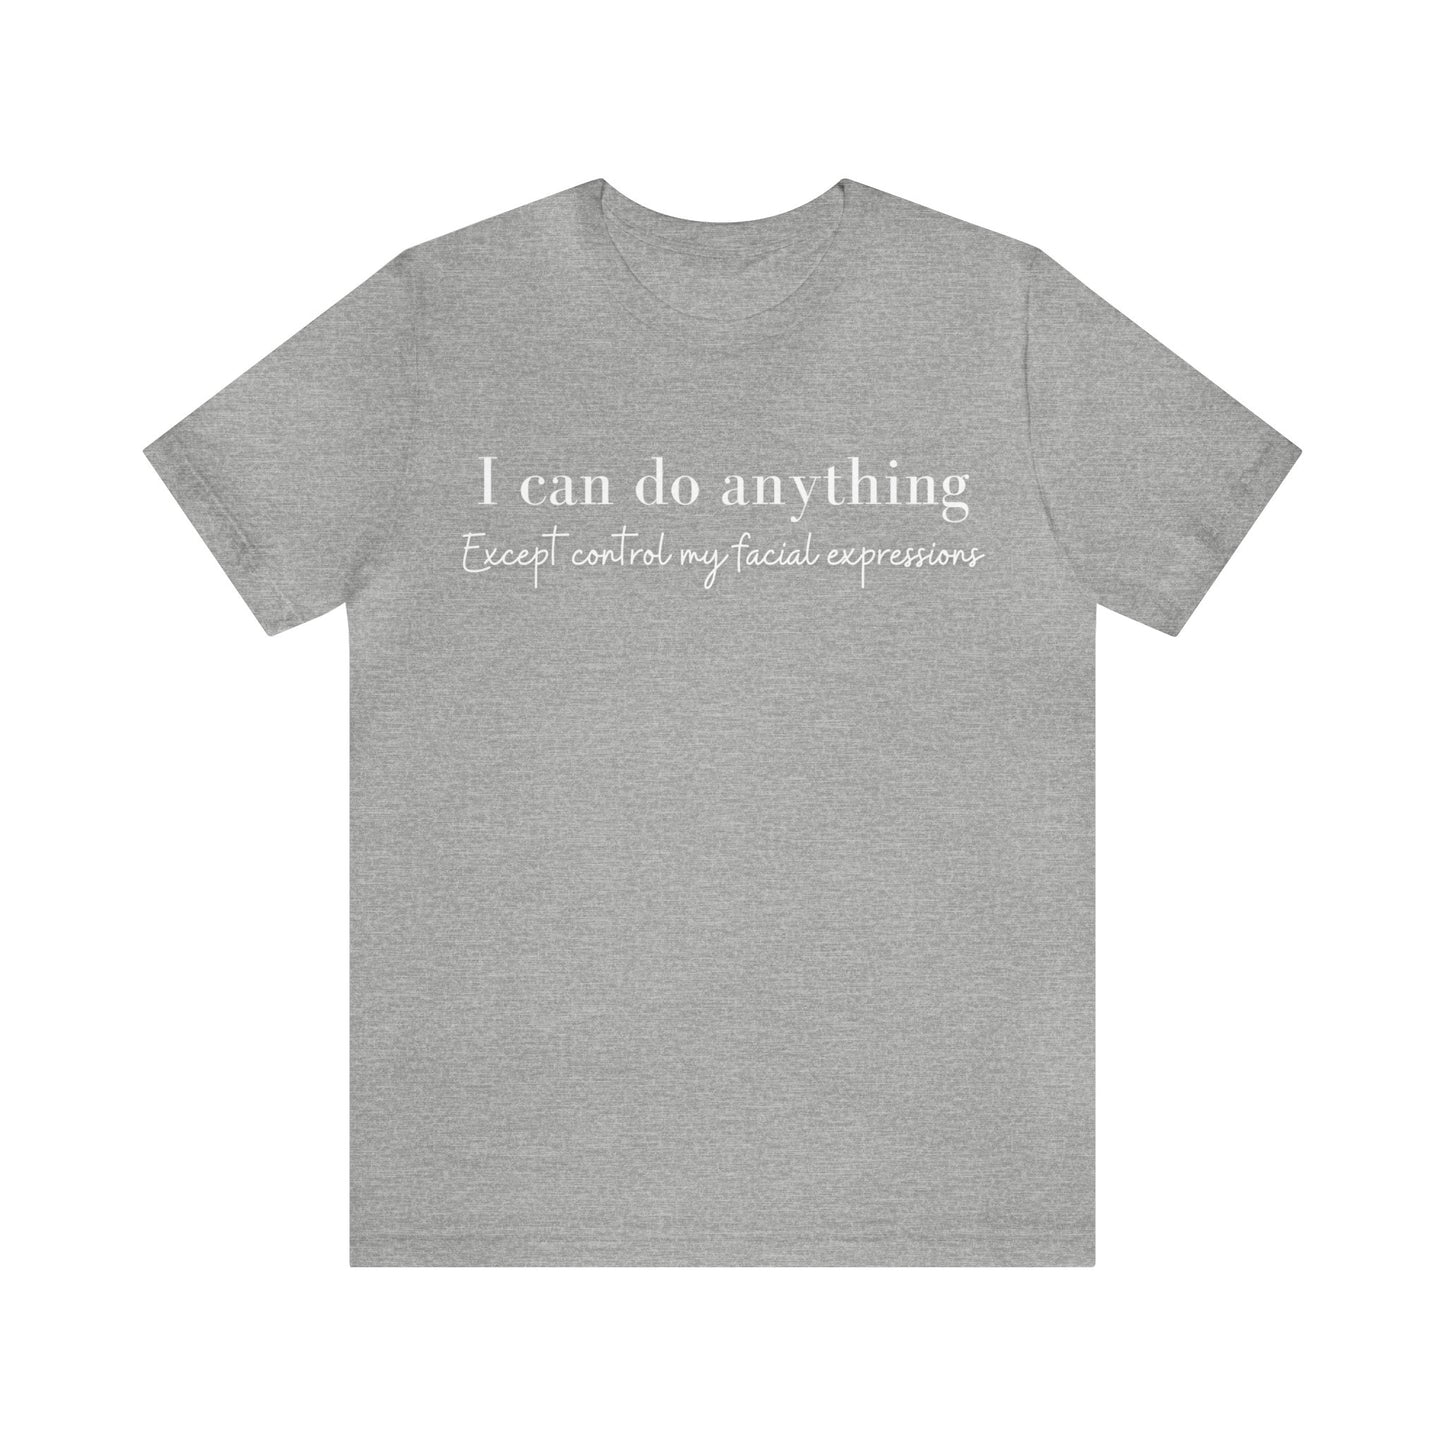 I Can Do Anything Except Control My Facial Expressions Short Sleeve Tee